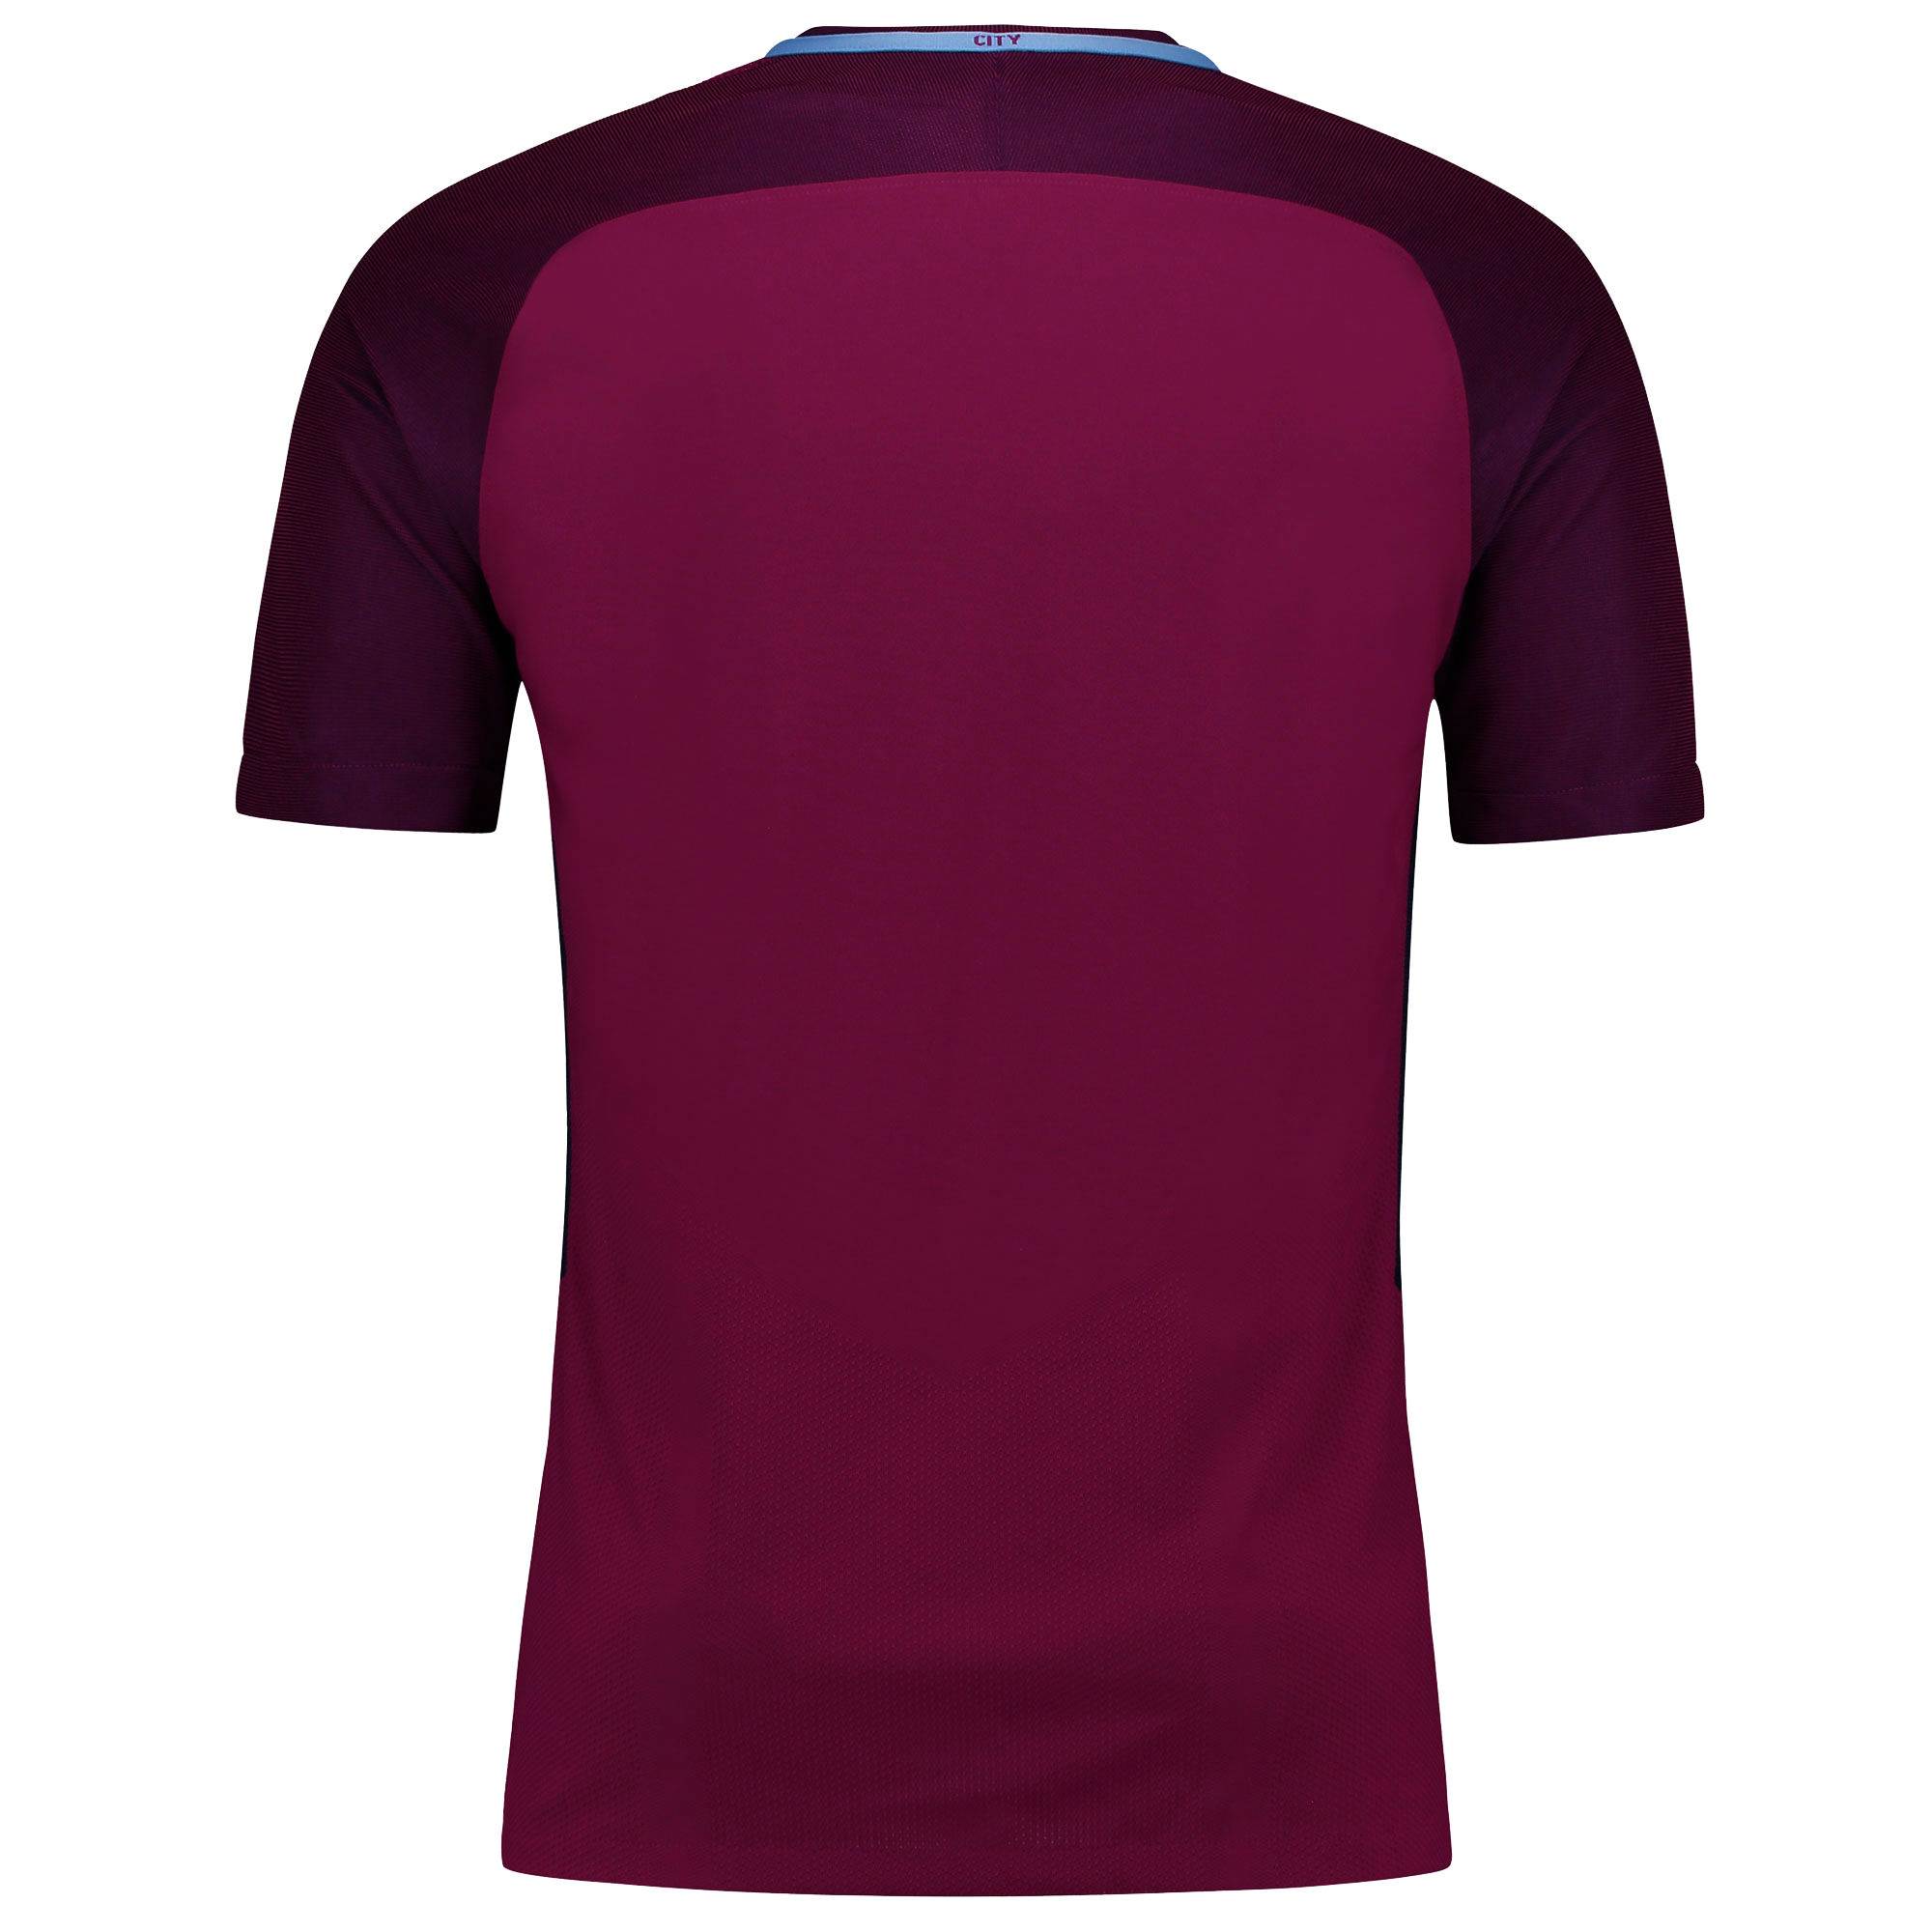 Manchester City go maroon with away kit - Style - FTBL Life